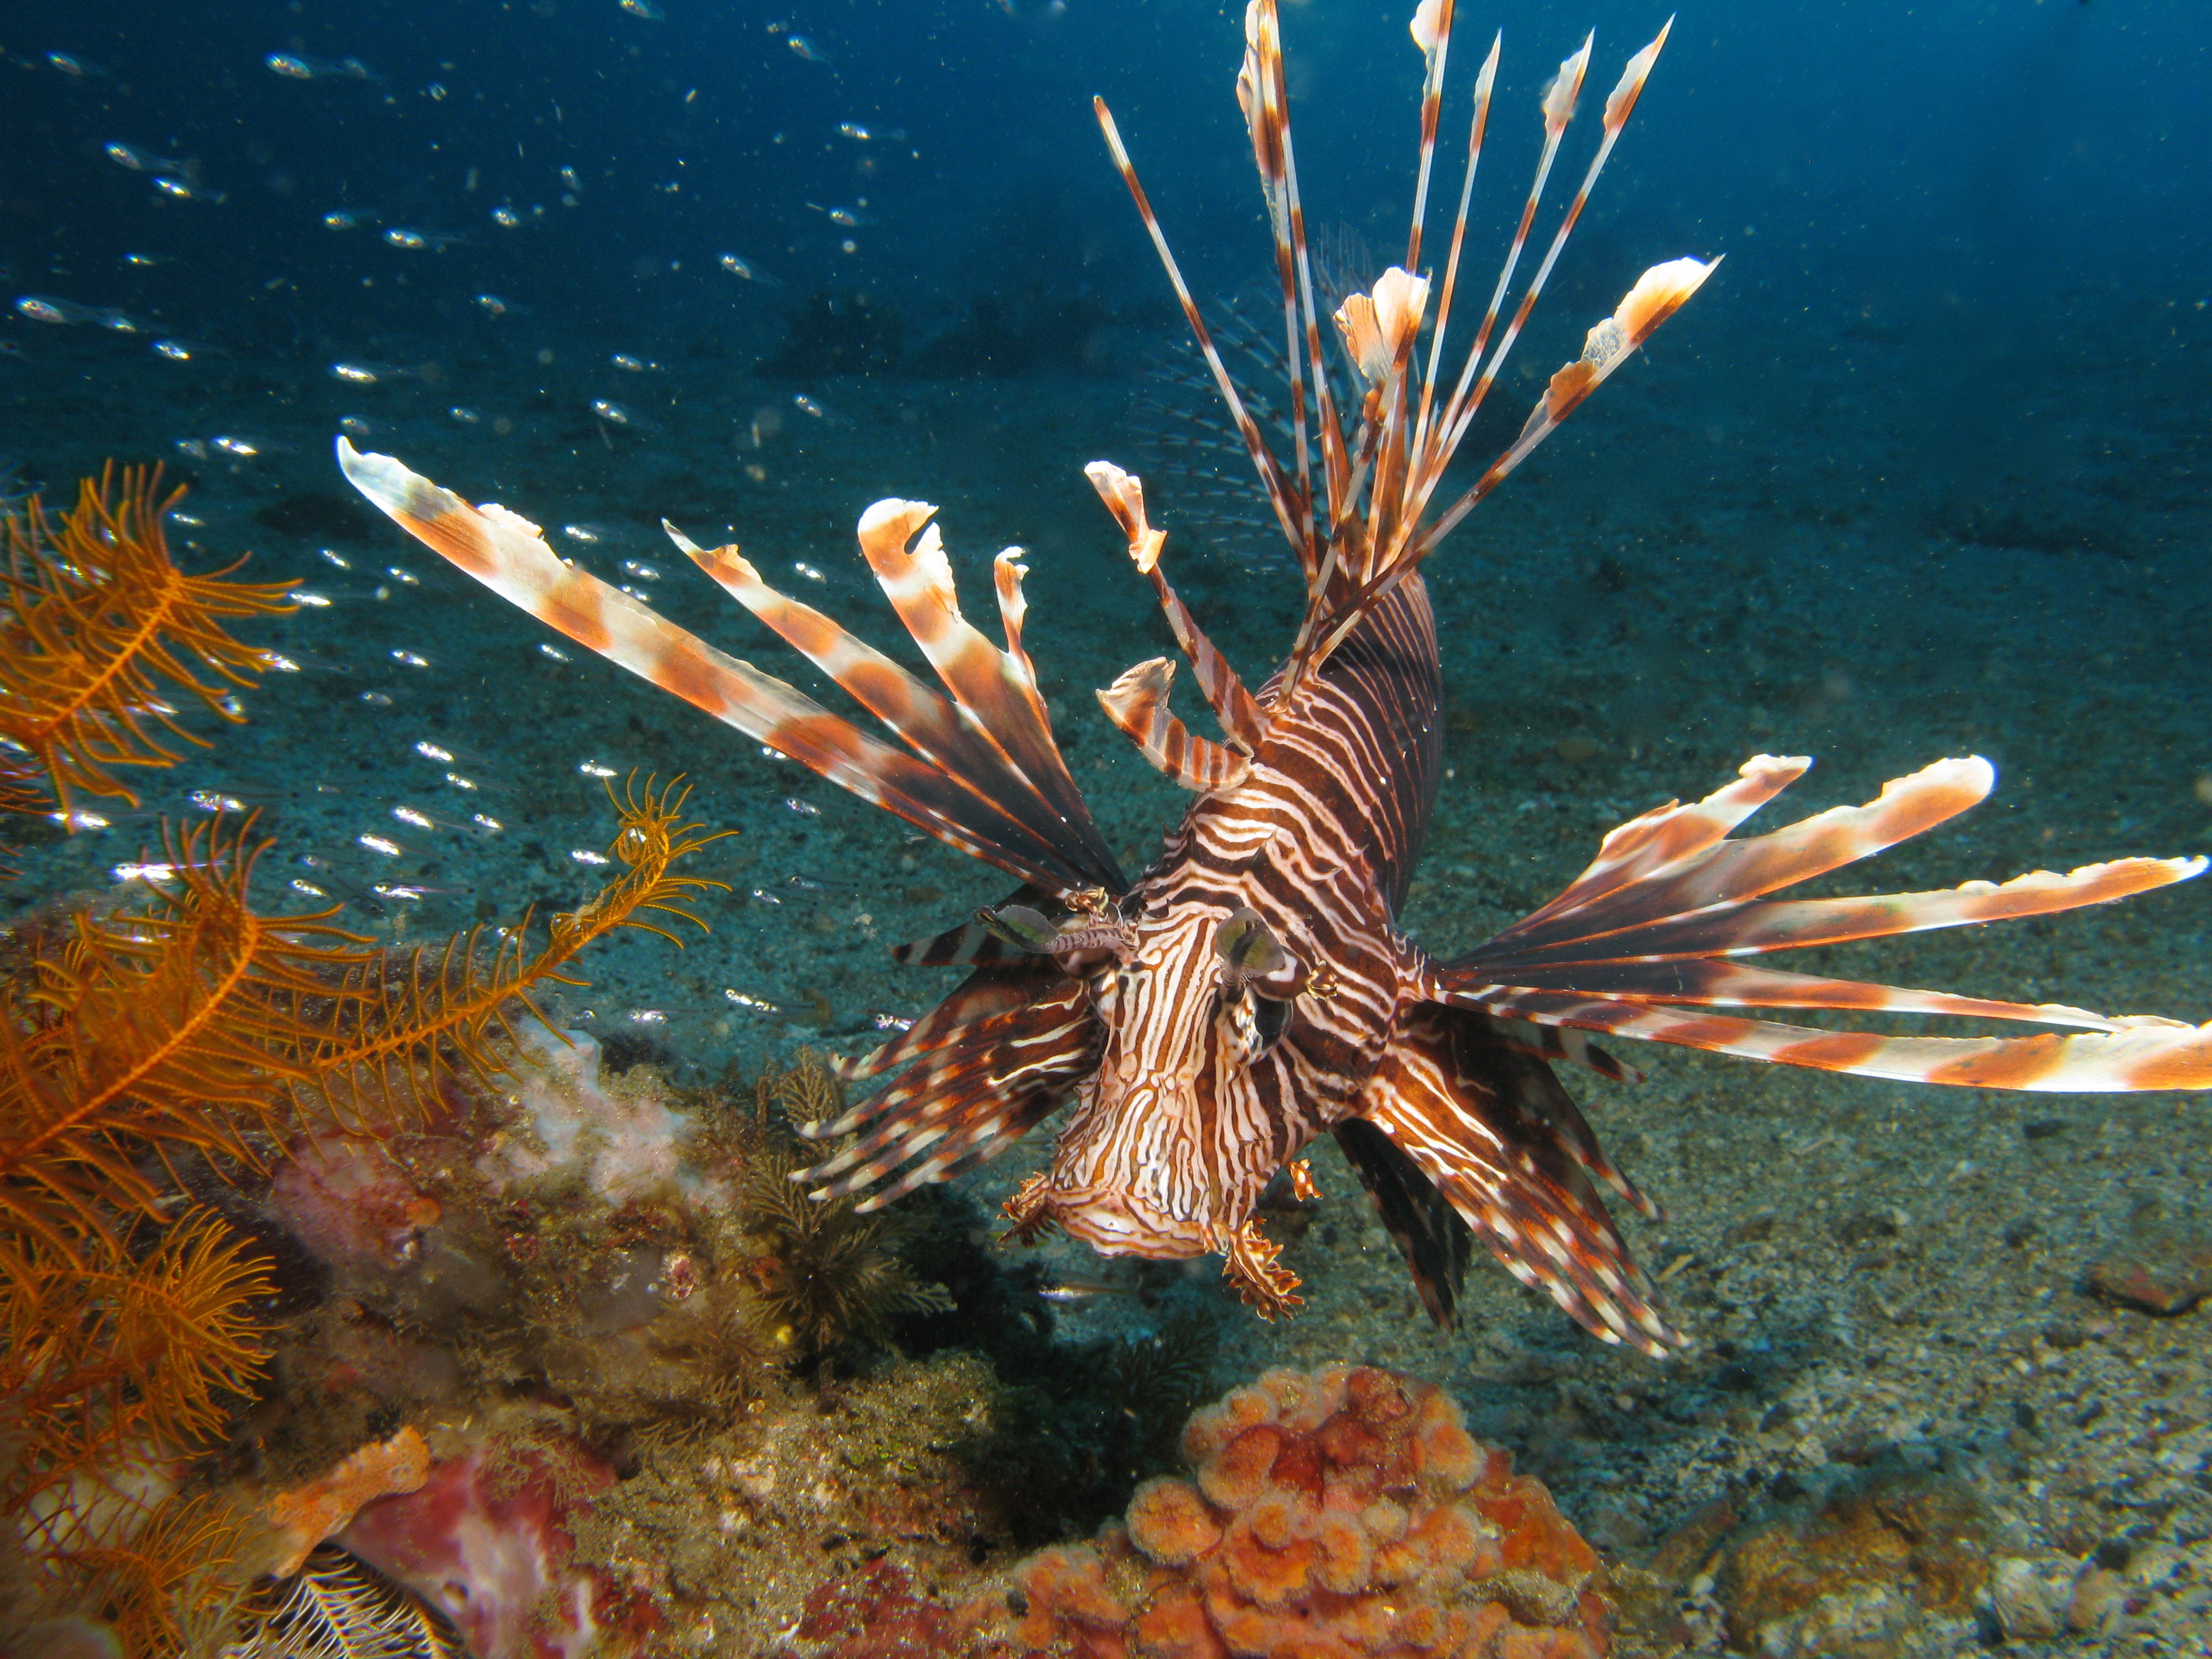 Lionfish at Piti Bomb Holes dive site in Guam explores the holes created from caves that collapsed in search of prey